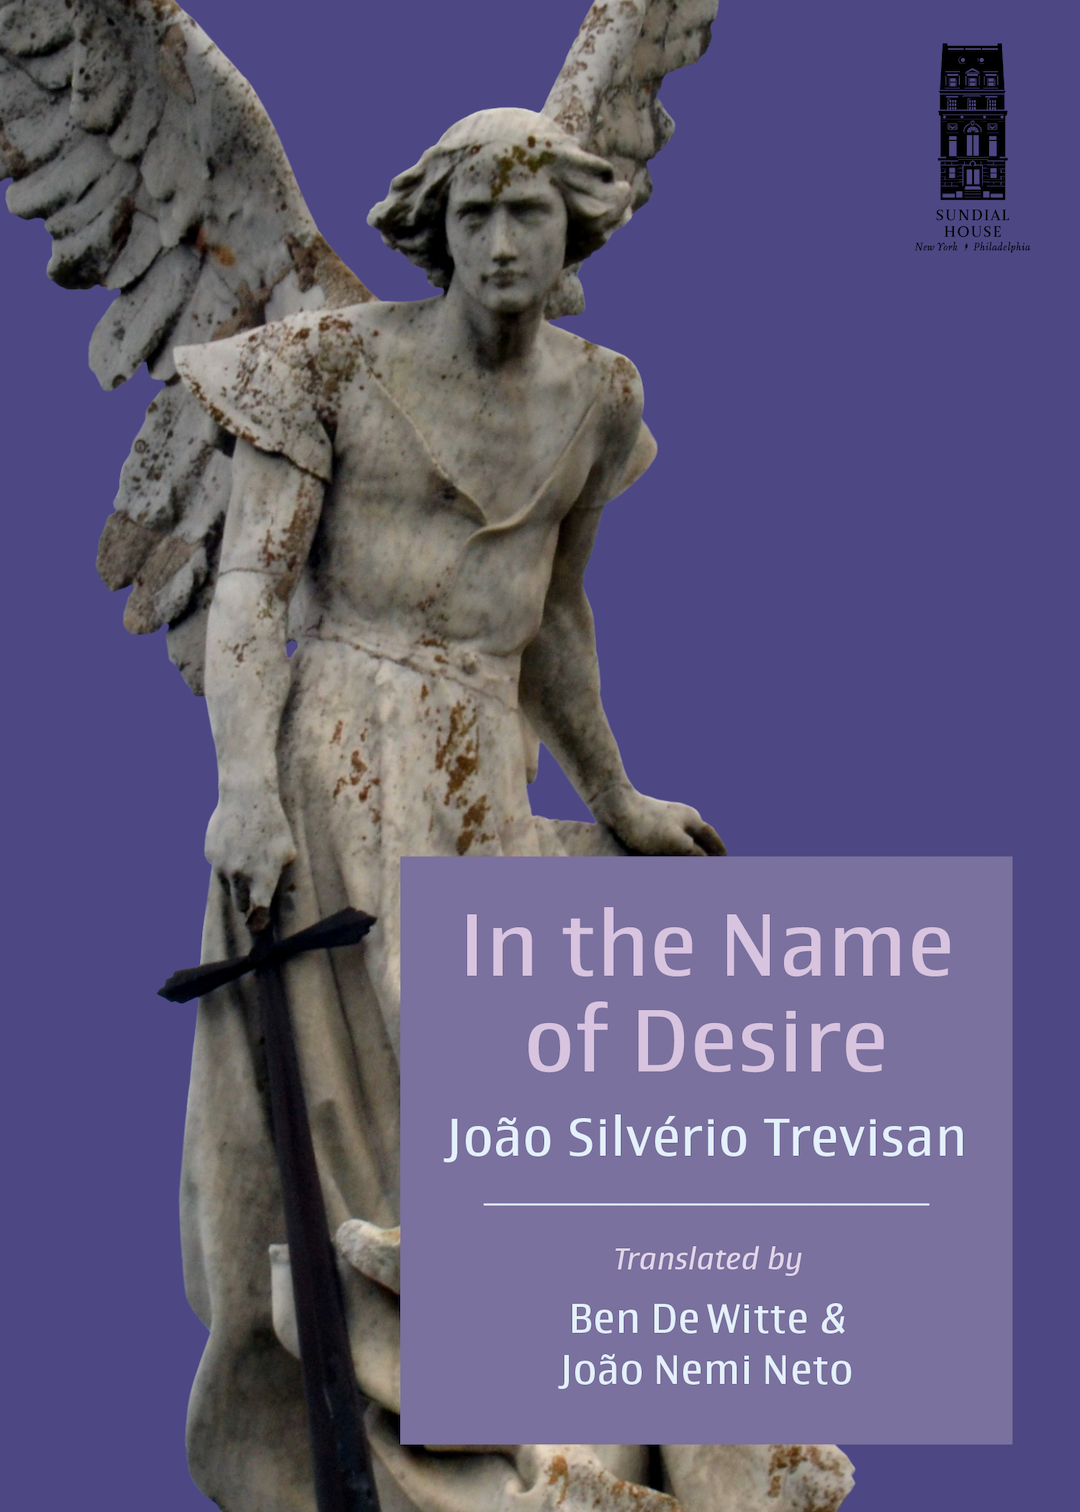 In The Name of Desire, by João S. Trevisan